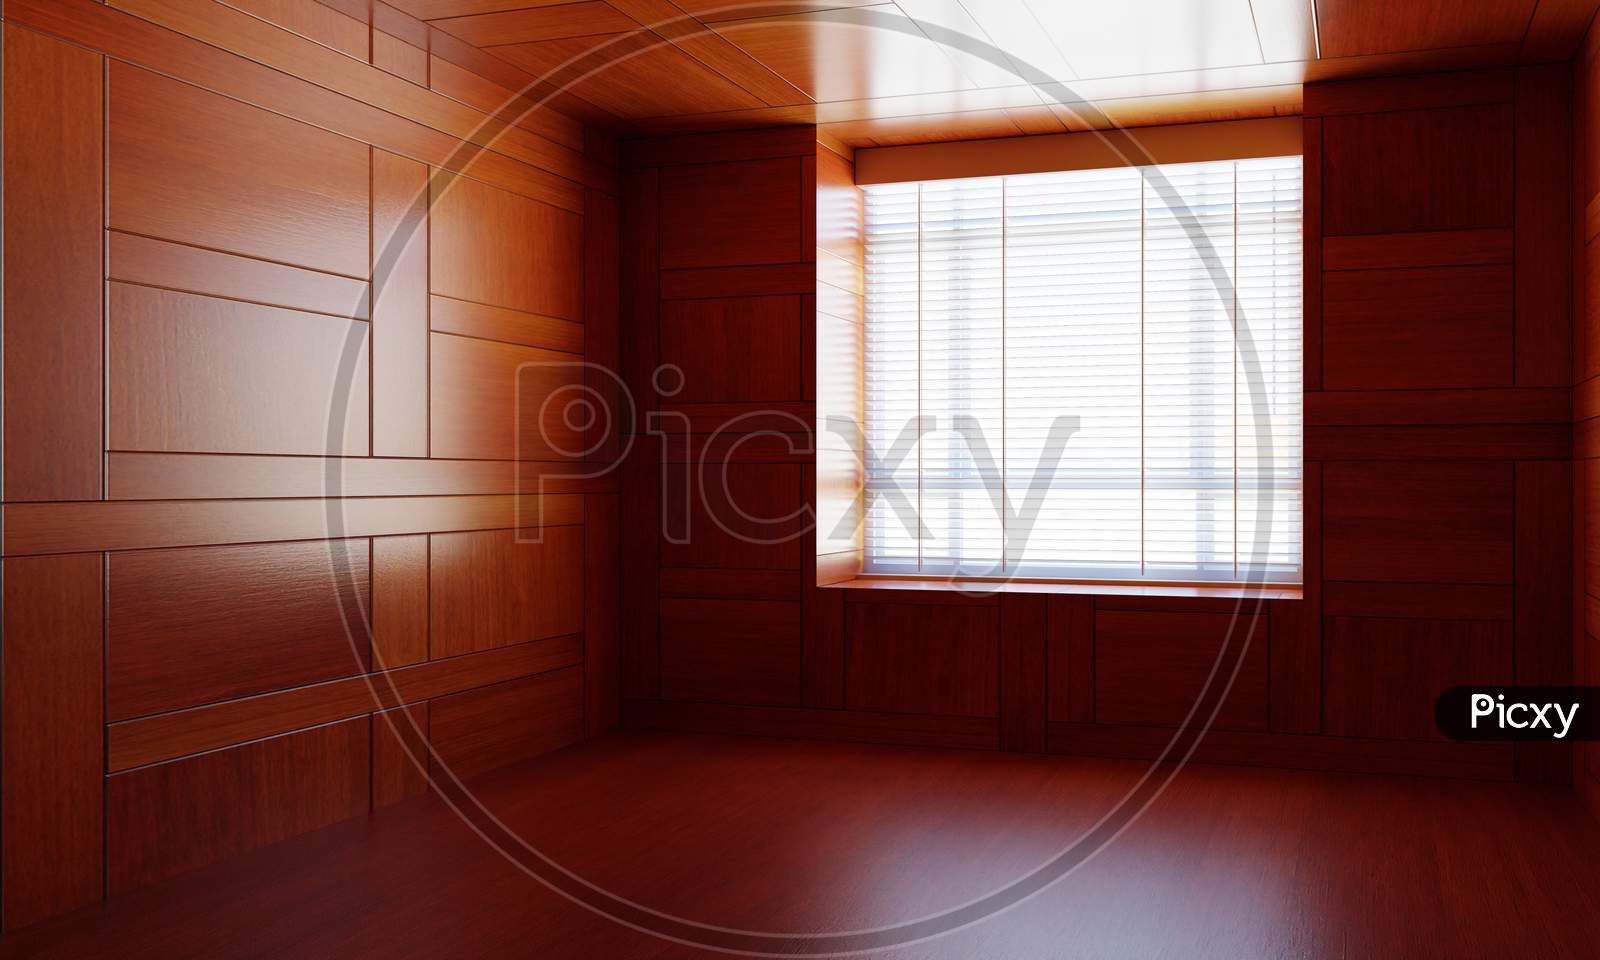 Empty Asian Style Wooden Room With Window. Japanese Modern Design With The Wood Plank. Architecture And Interior Concept. 3Dillustration Rendering